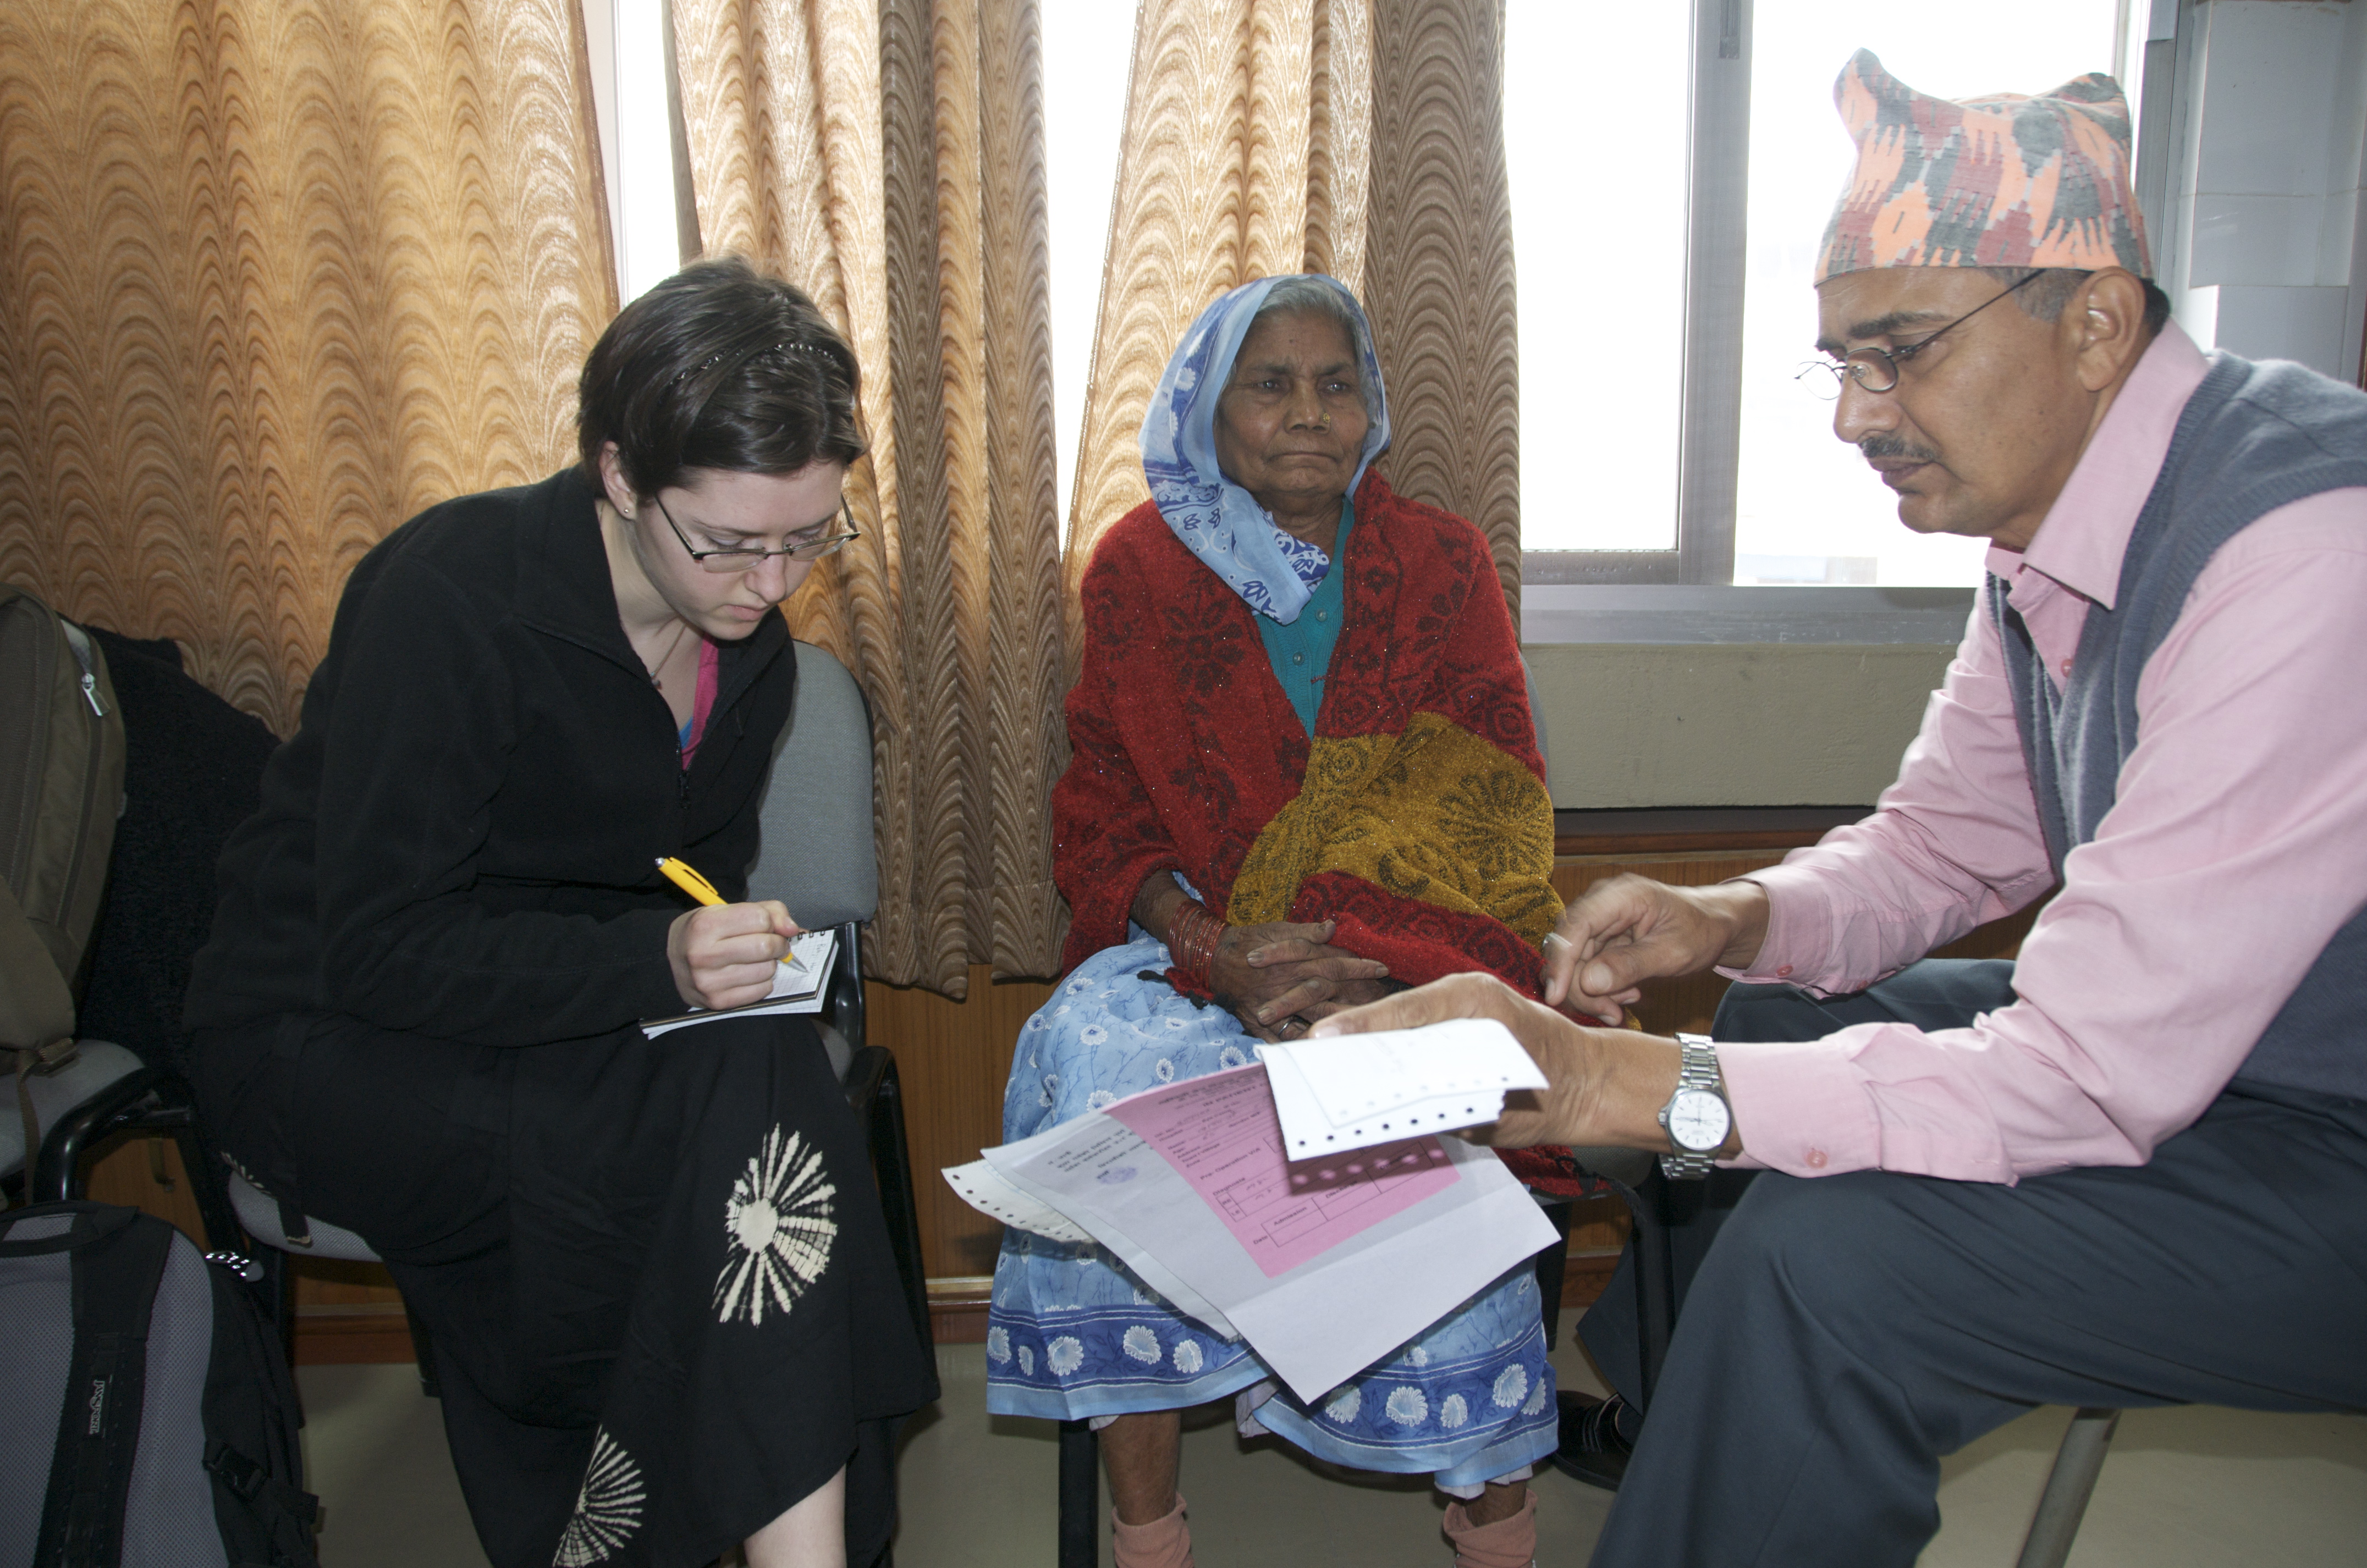 Justine Spencer with Mr. RP Kandel of Seva Nepal, interviewing a cataract patient prior to her surgery